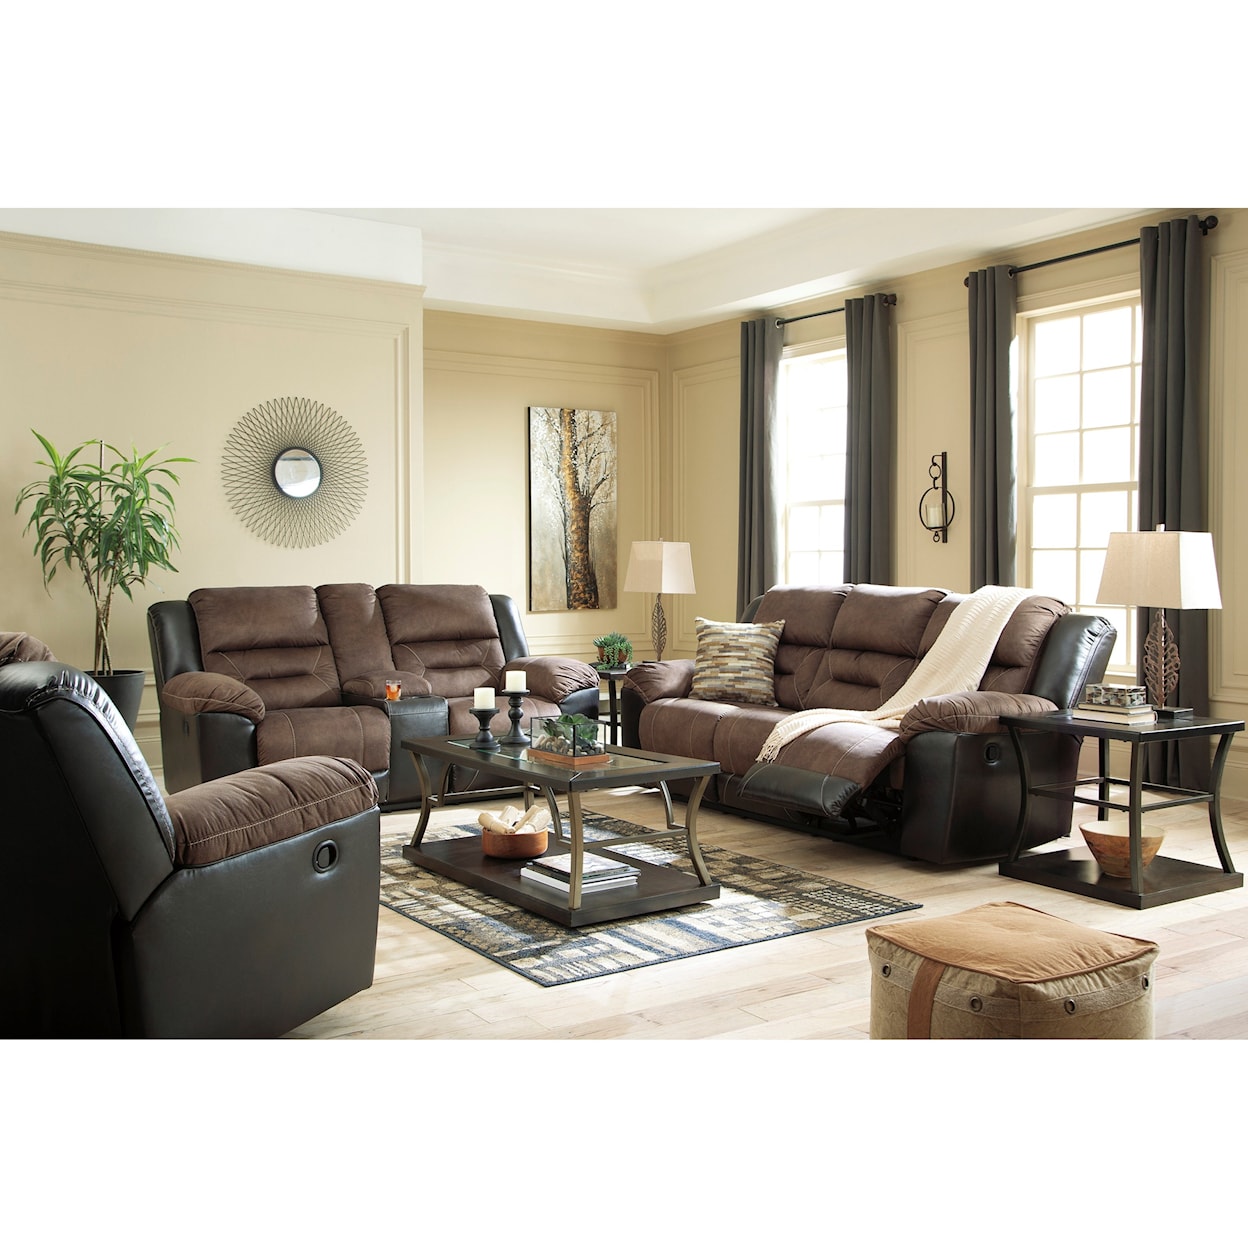 Signature Design by Ashley Earhart Recling Living Room Group